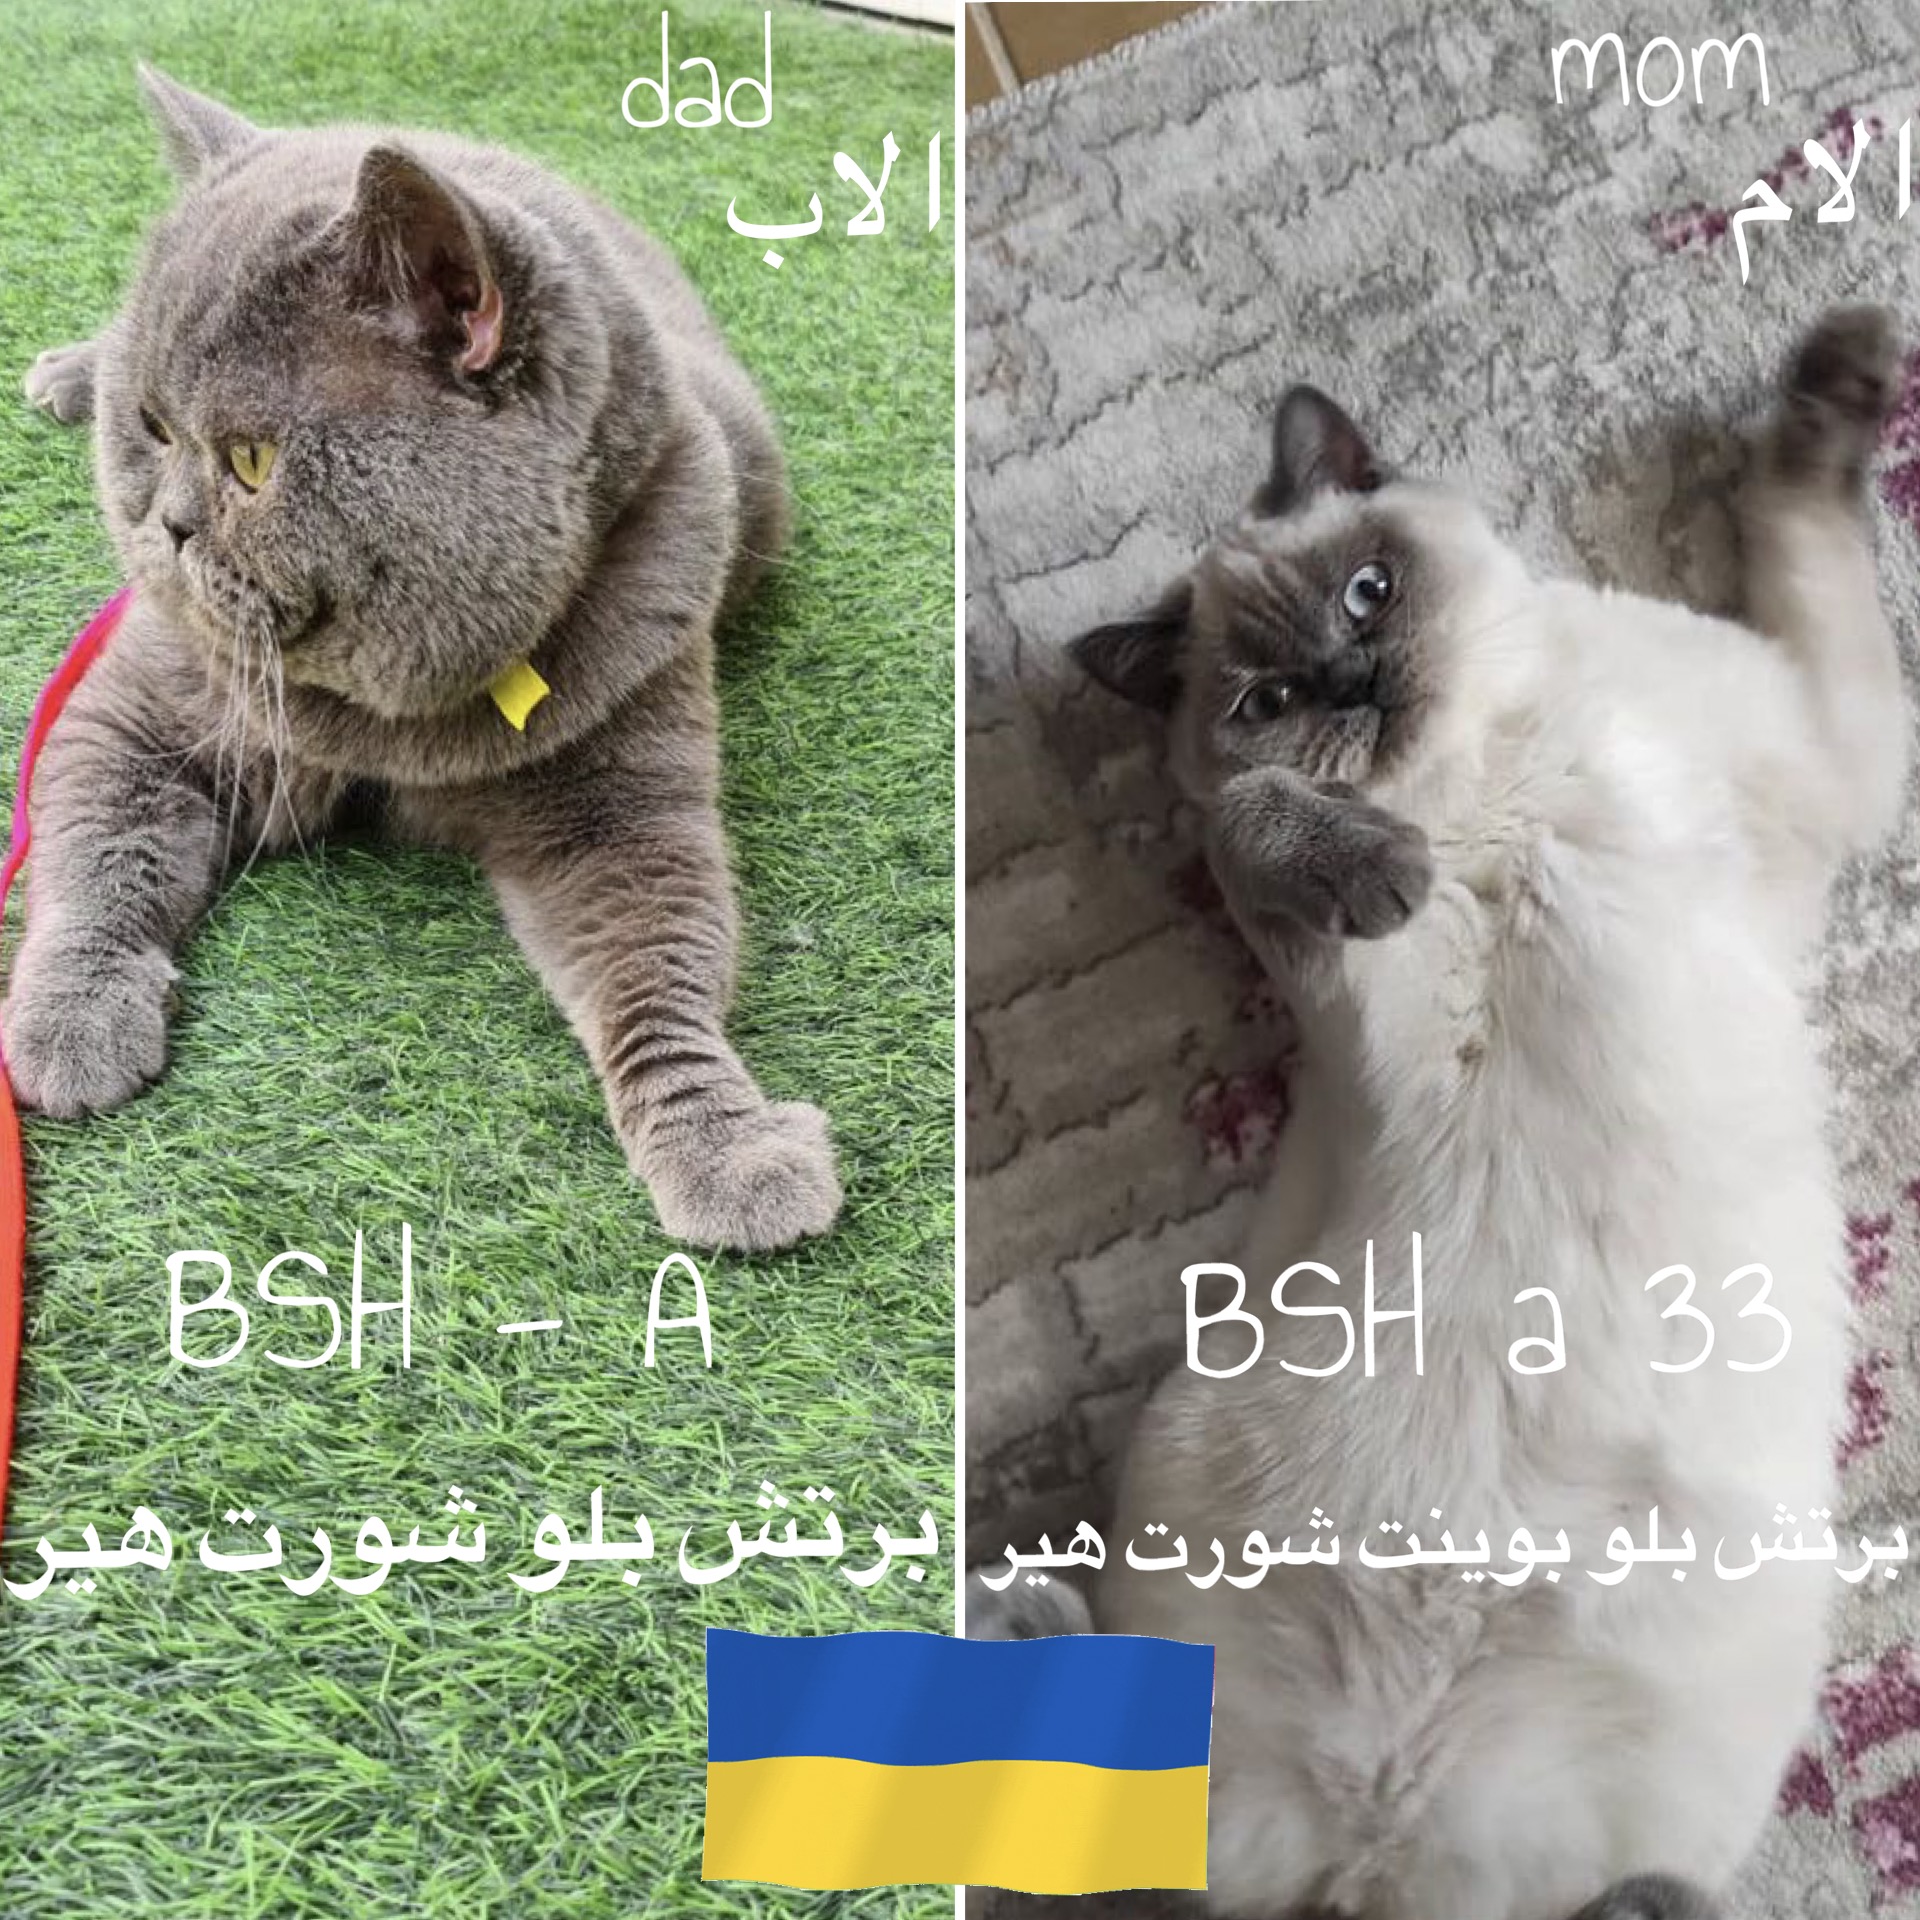 For sale male British shorthair from registered Uk